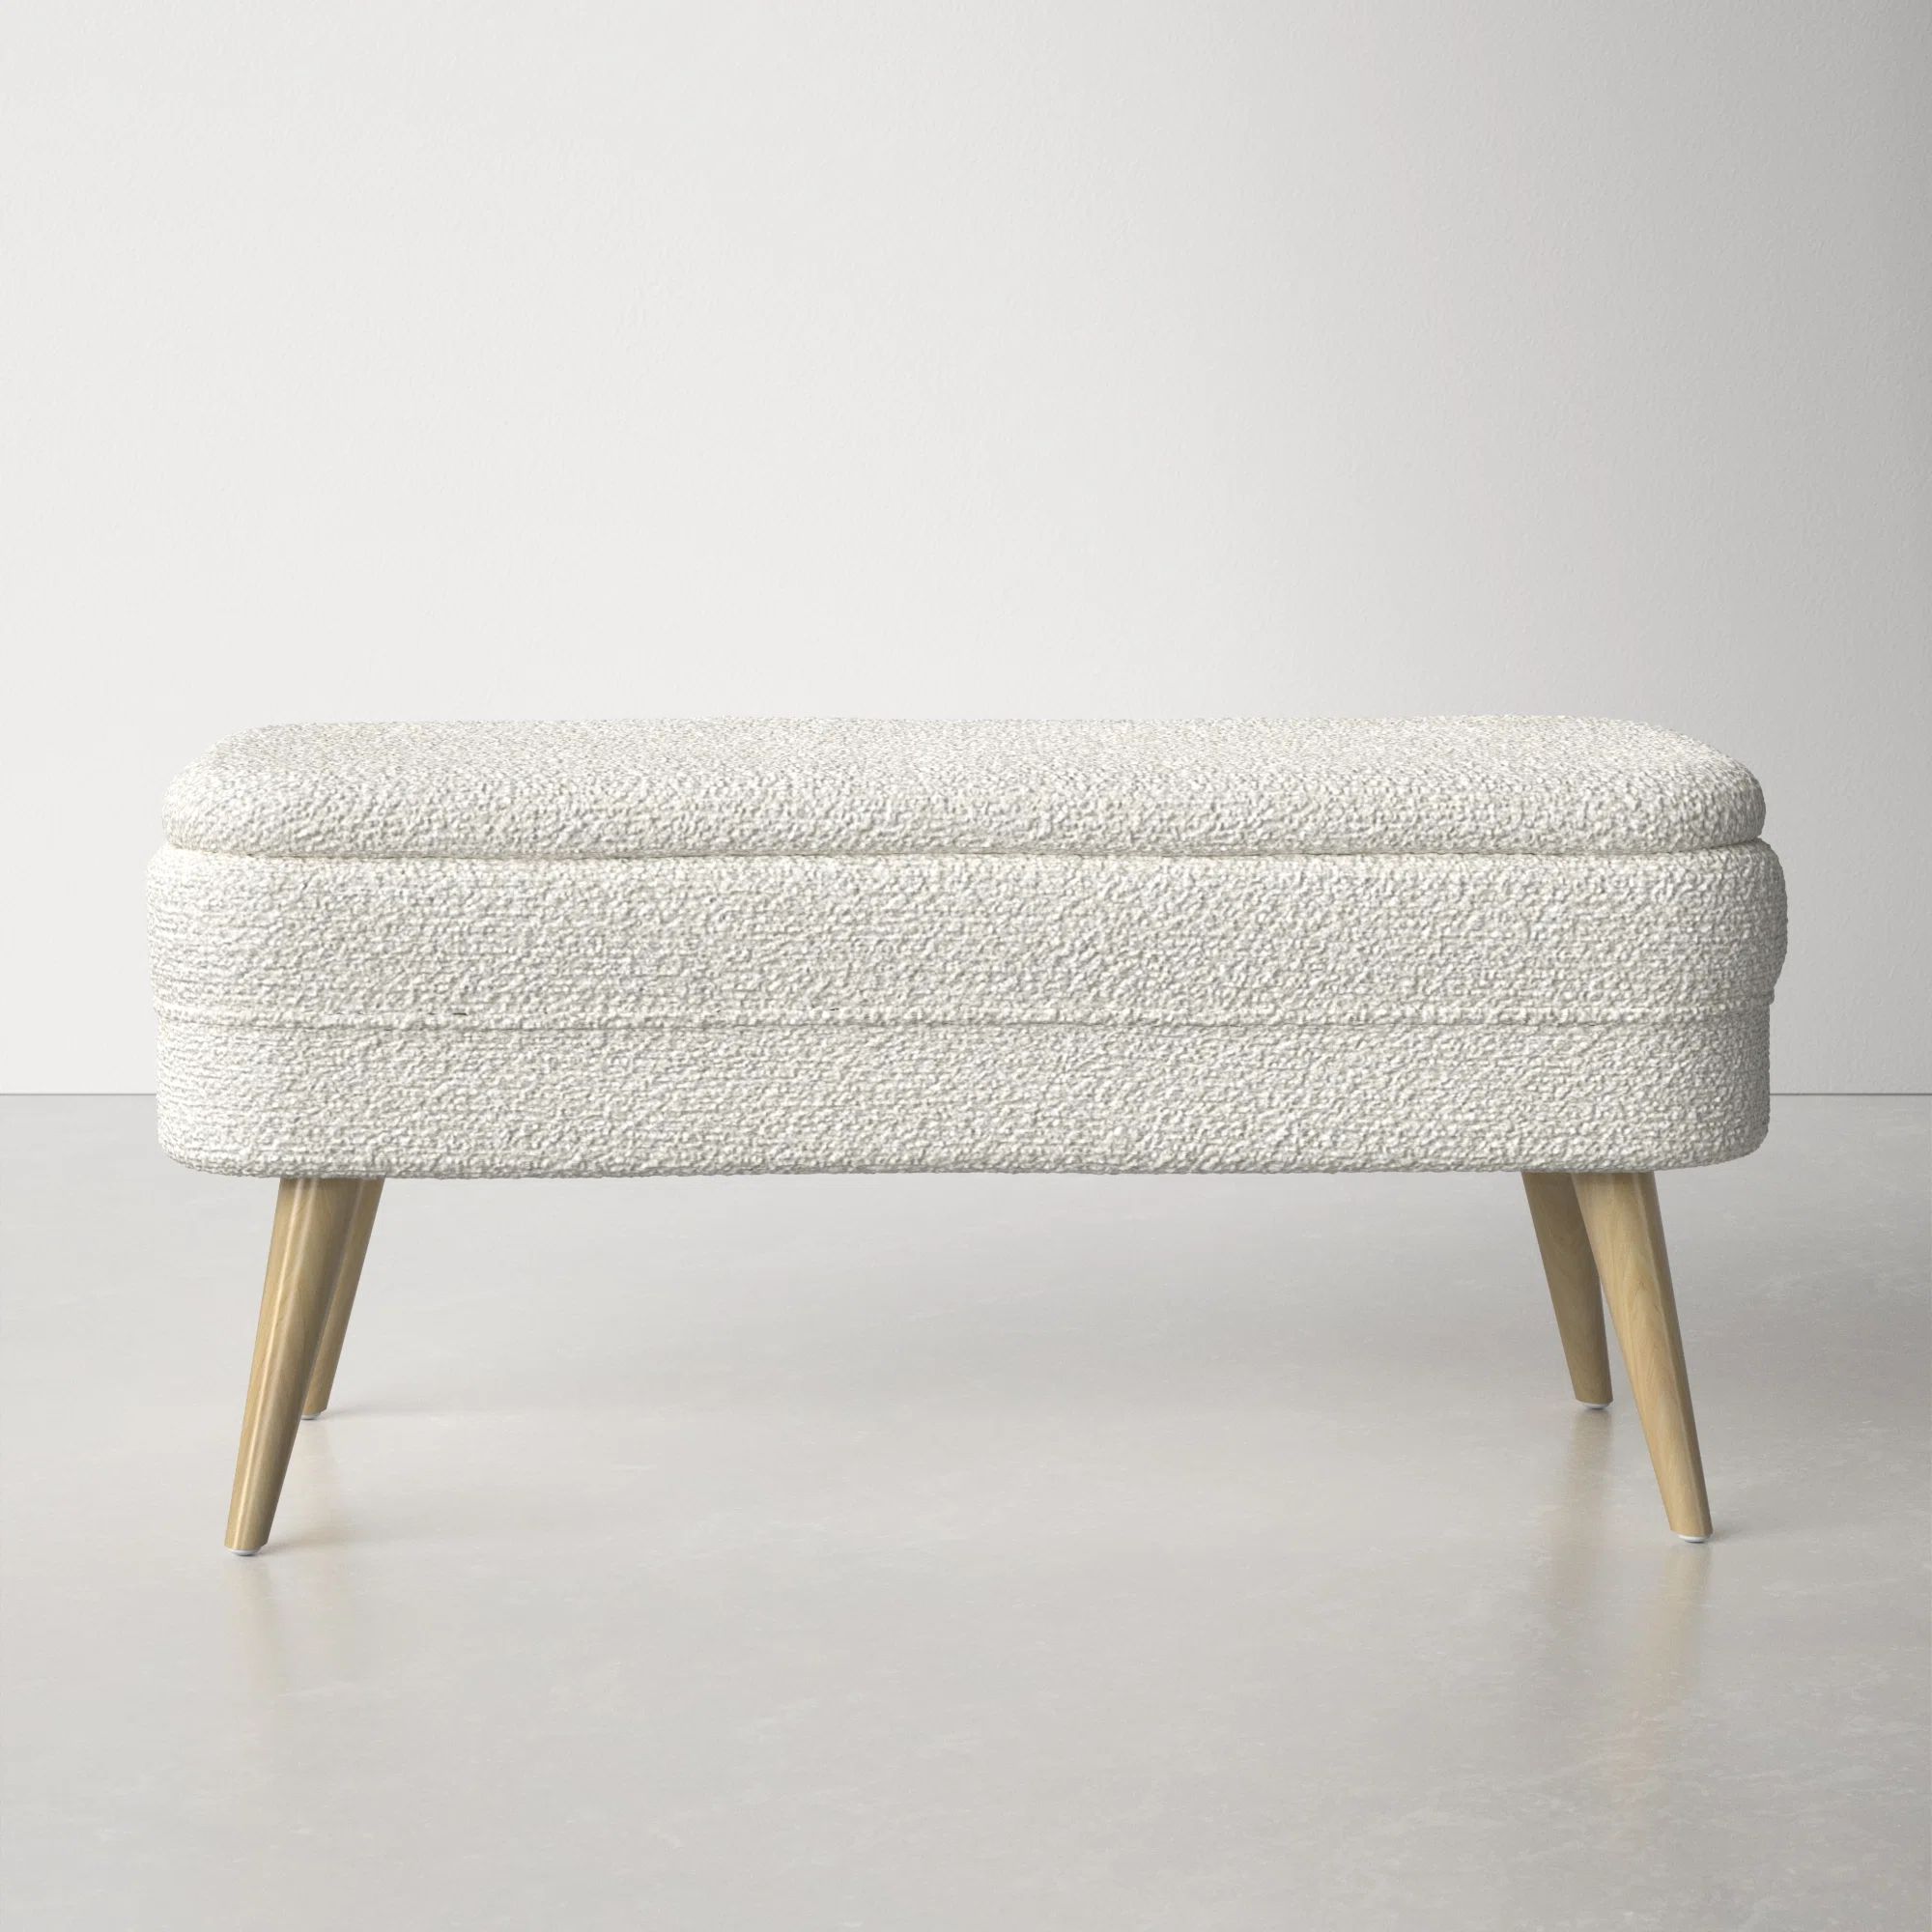 Atchison Wood Upholstered Storage Bench with Wood Legs 40" x 16" x 19" | Wayfair North America